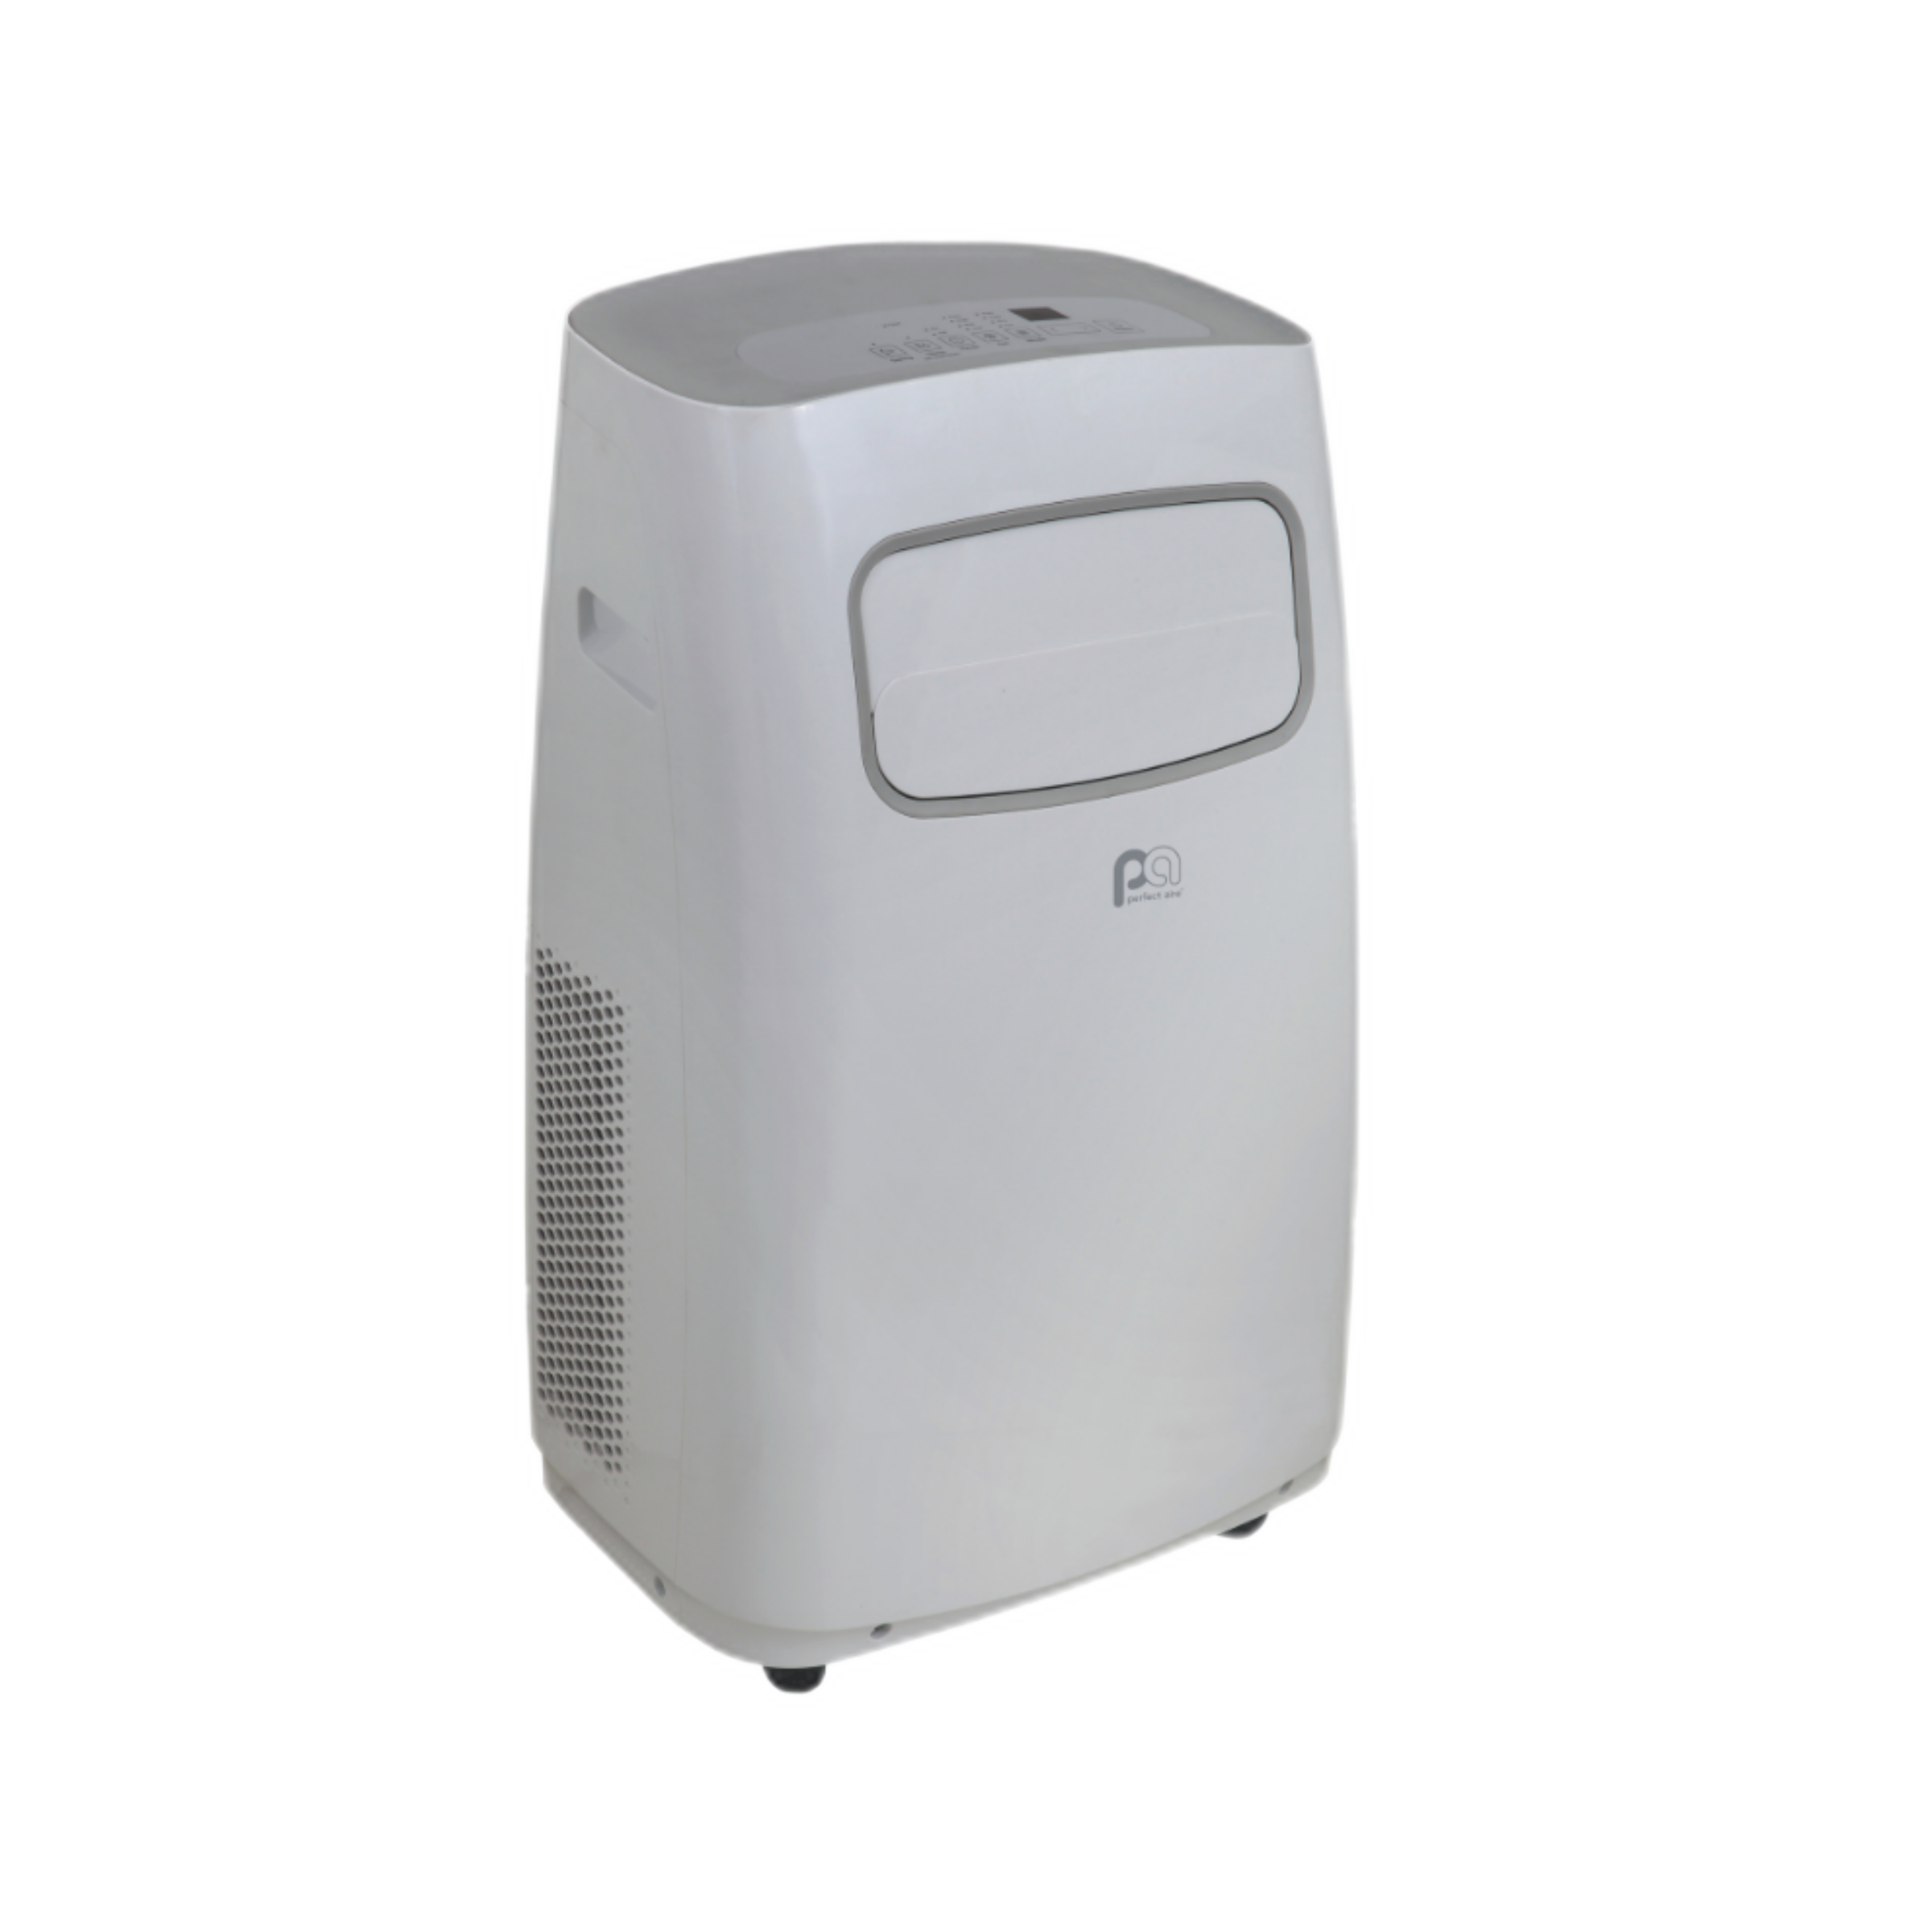 2PORT12000 Perfect Aire 12,000 BTU Compact Portable Air Conditioner - CEC, Sq. ft: 450-550 Coverage, With Remote Control, Non-Ozone Depleting R32 Refrigerant, EER = 8.9